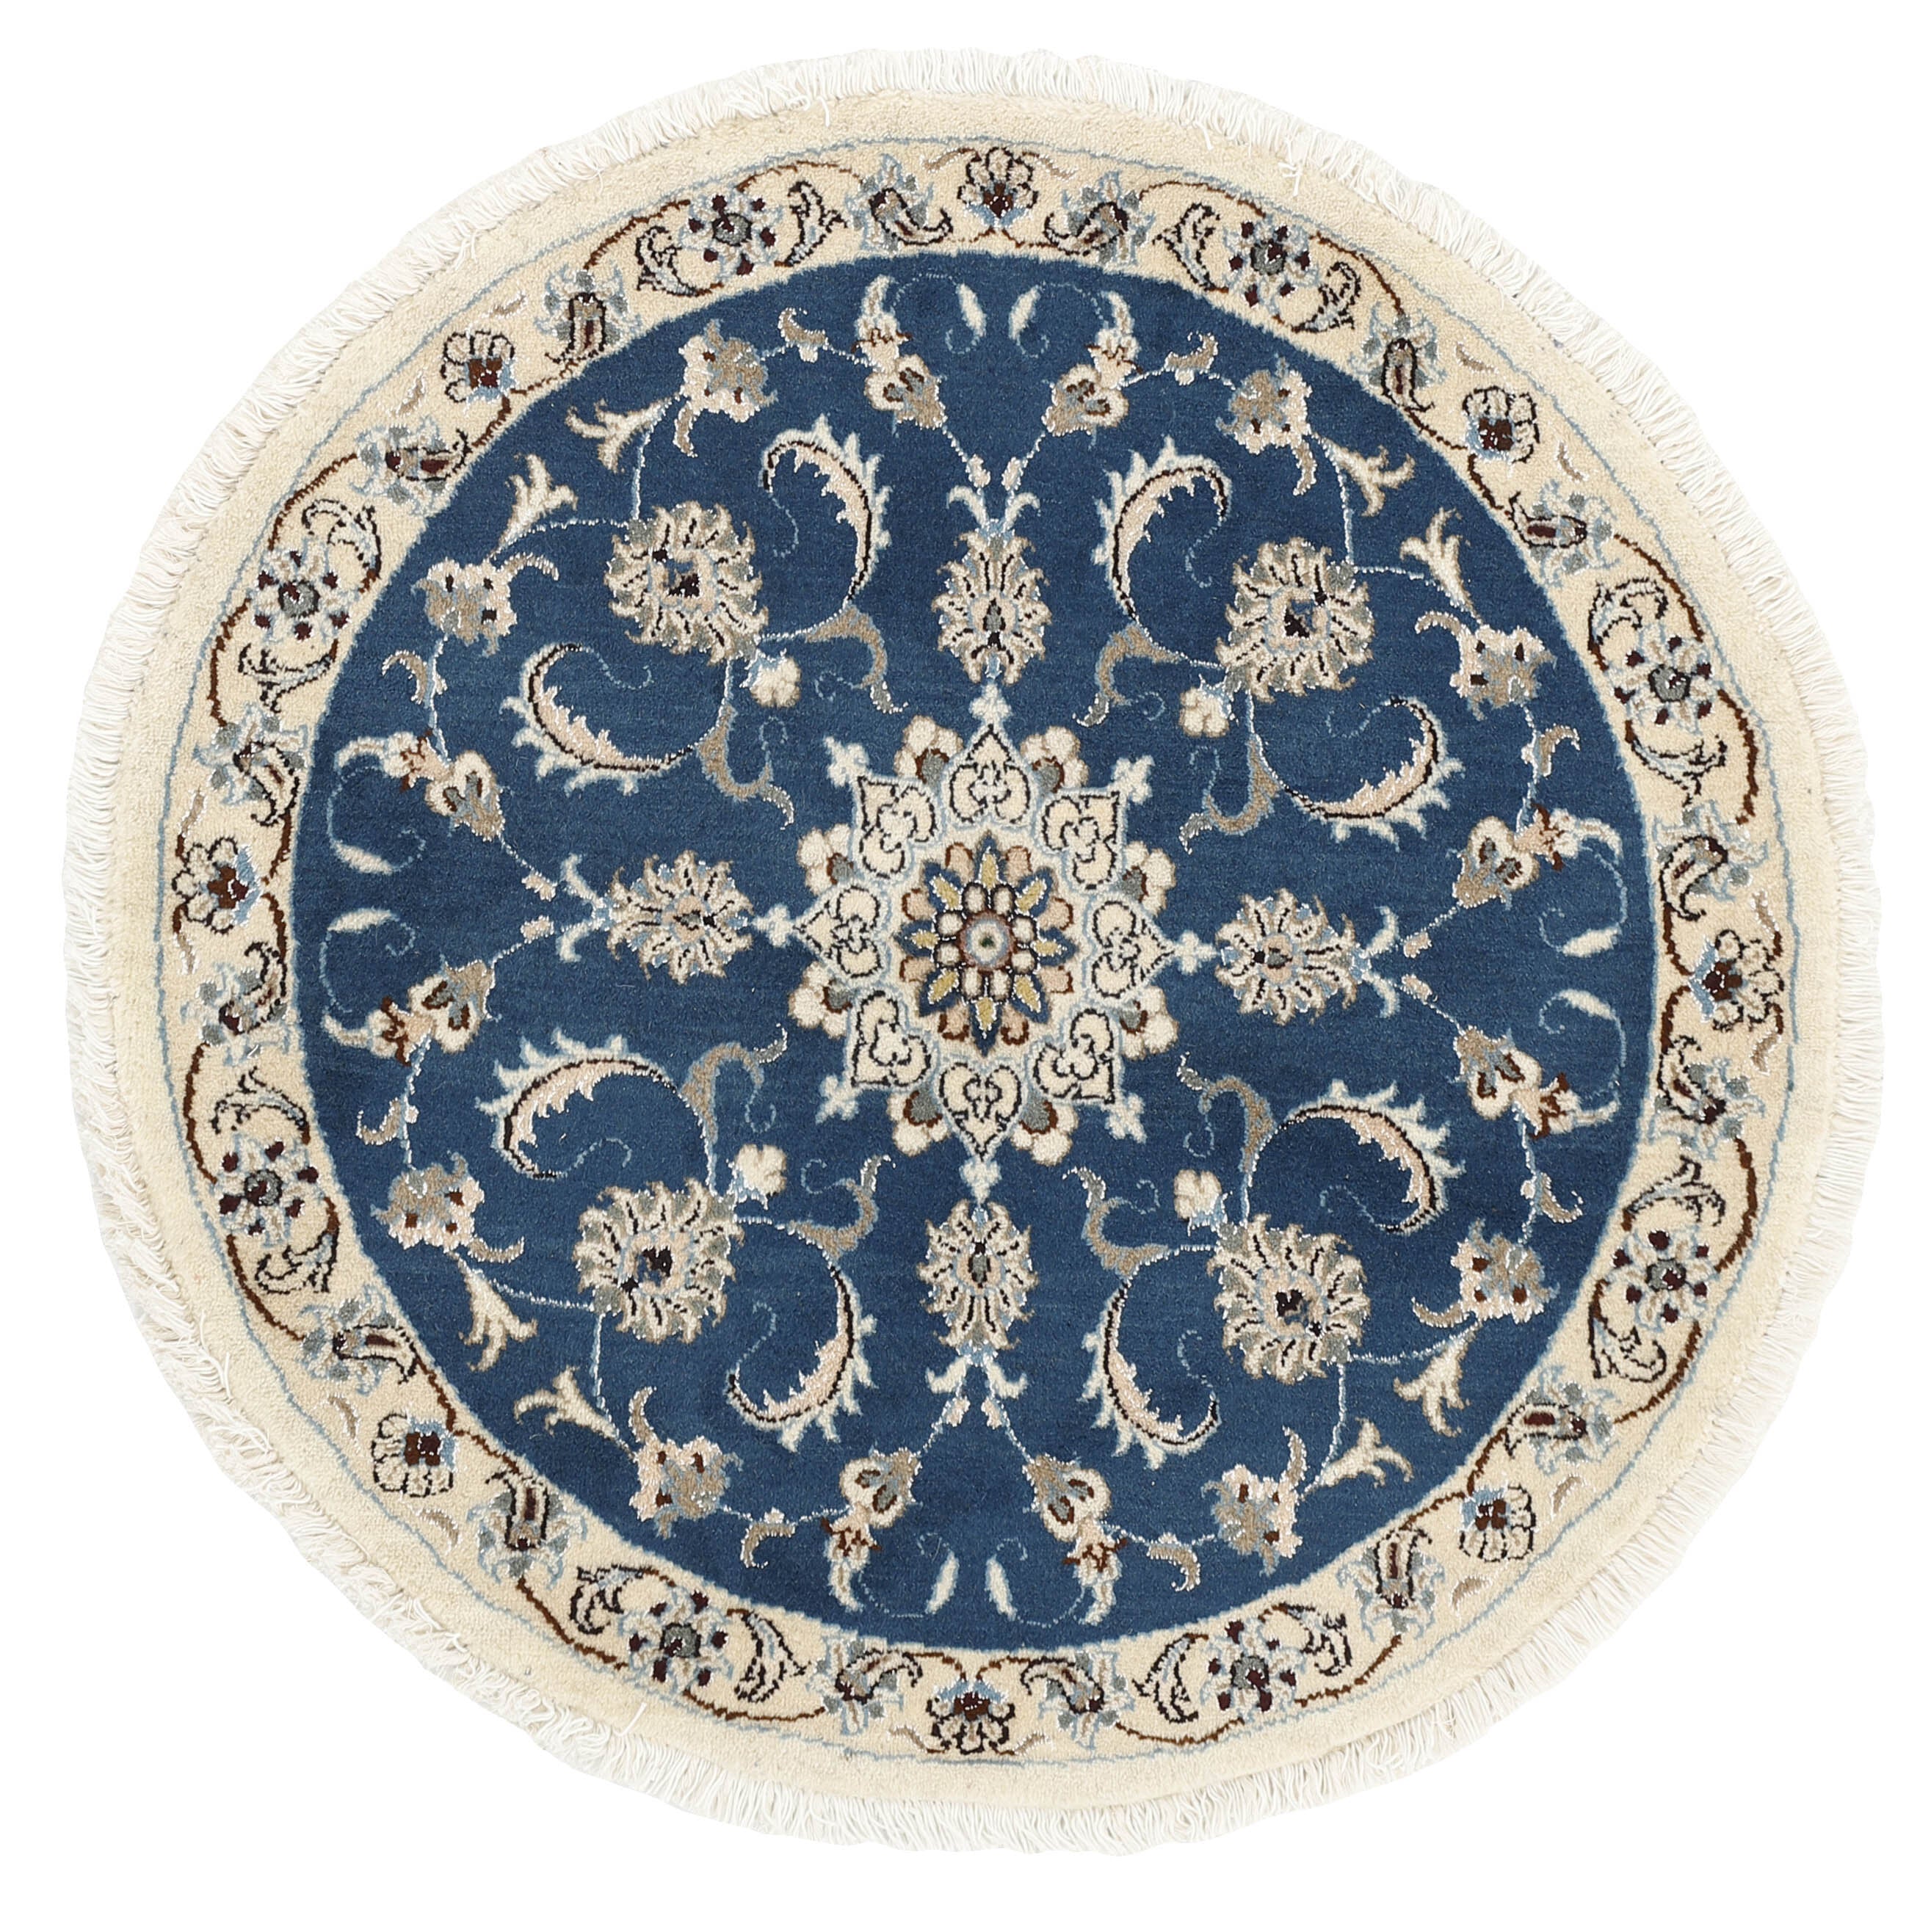 Authentic persian circle rug with a traditional floral design in cream and blue